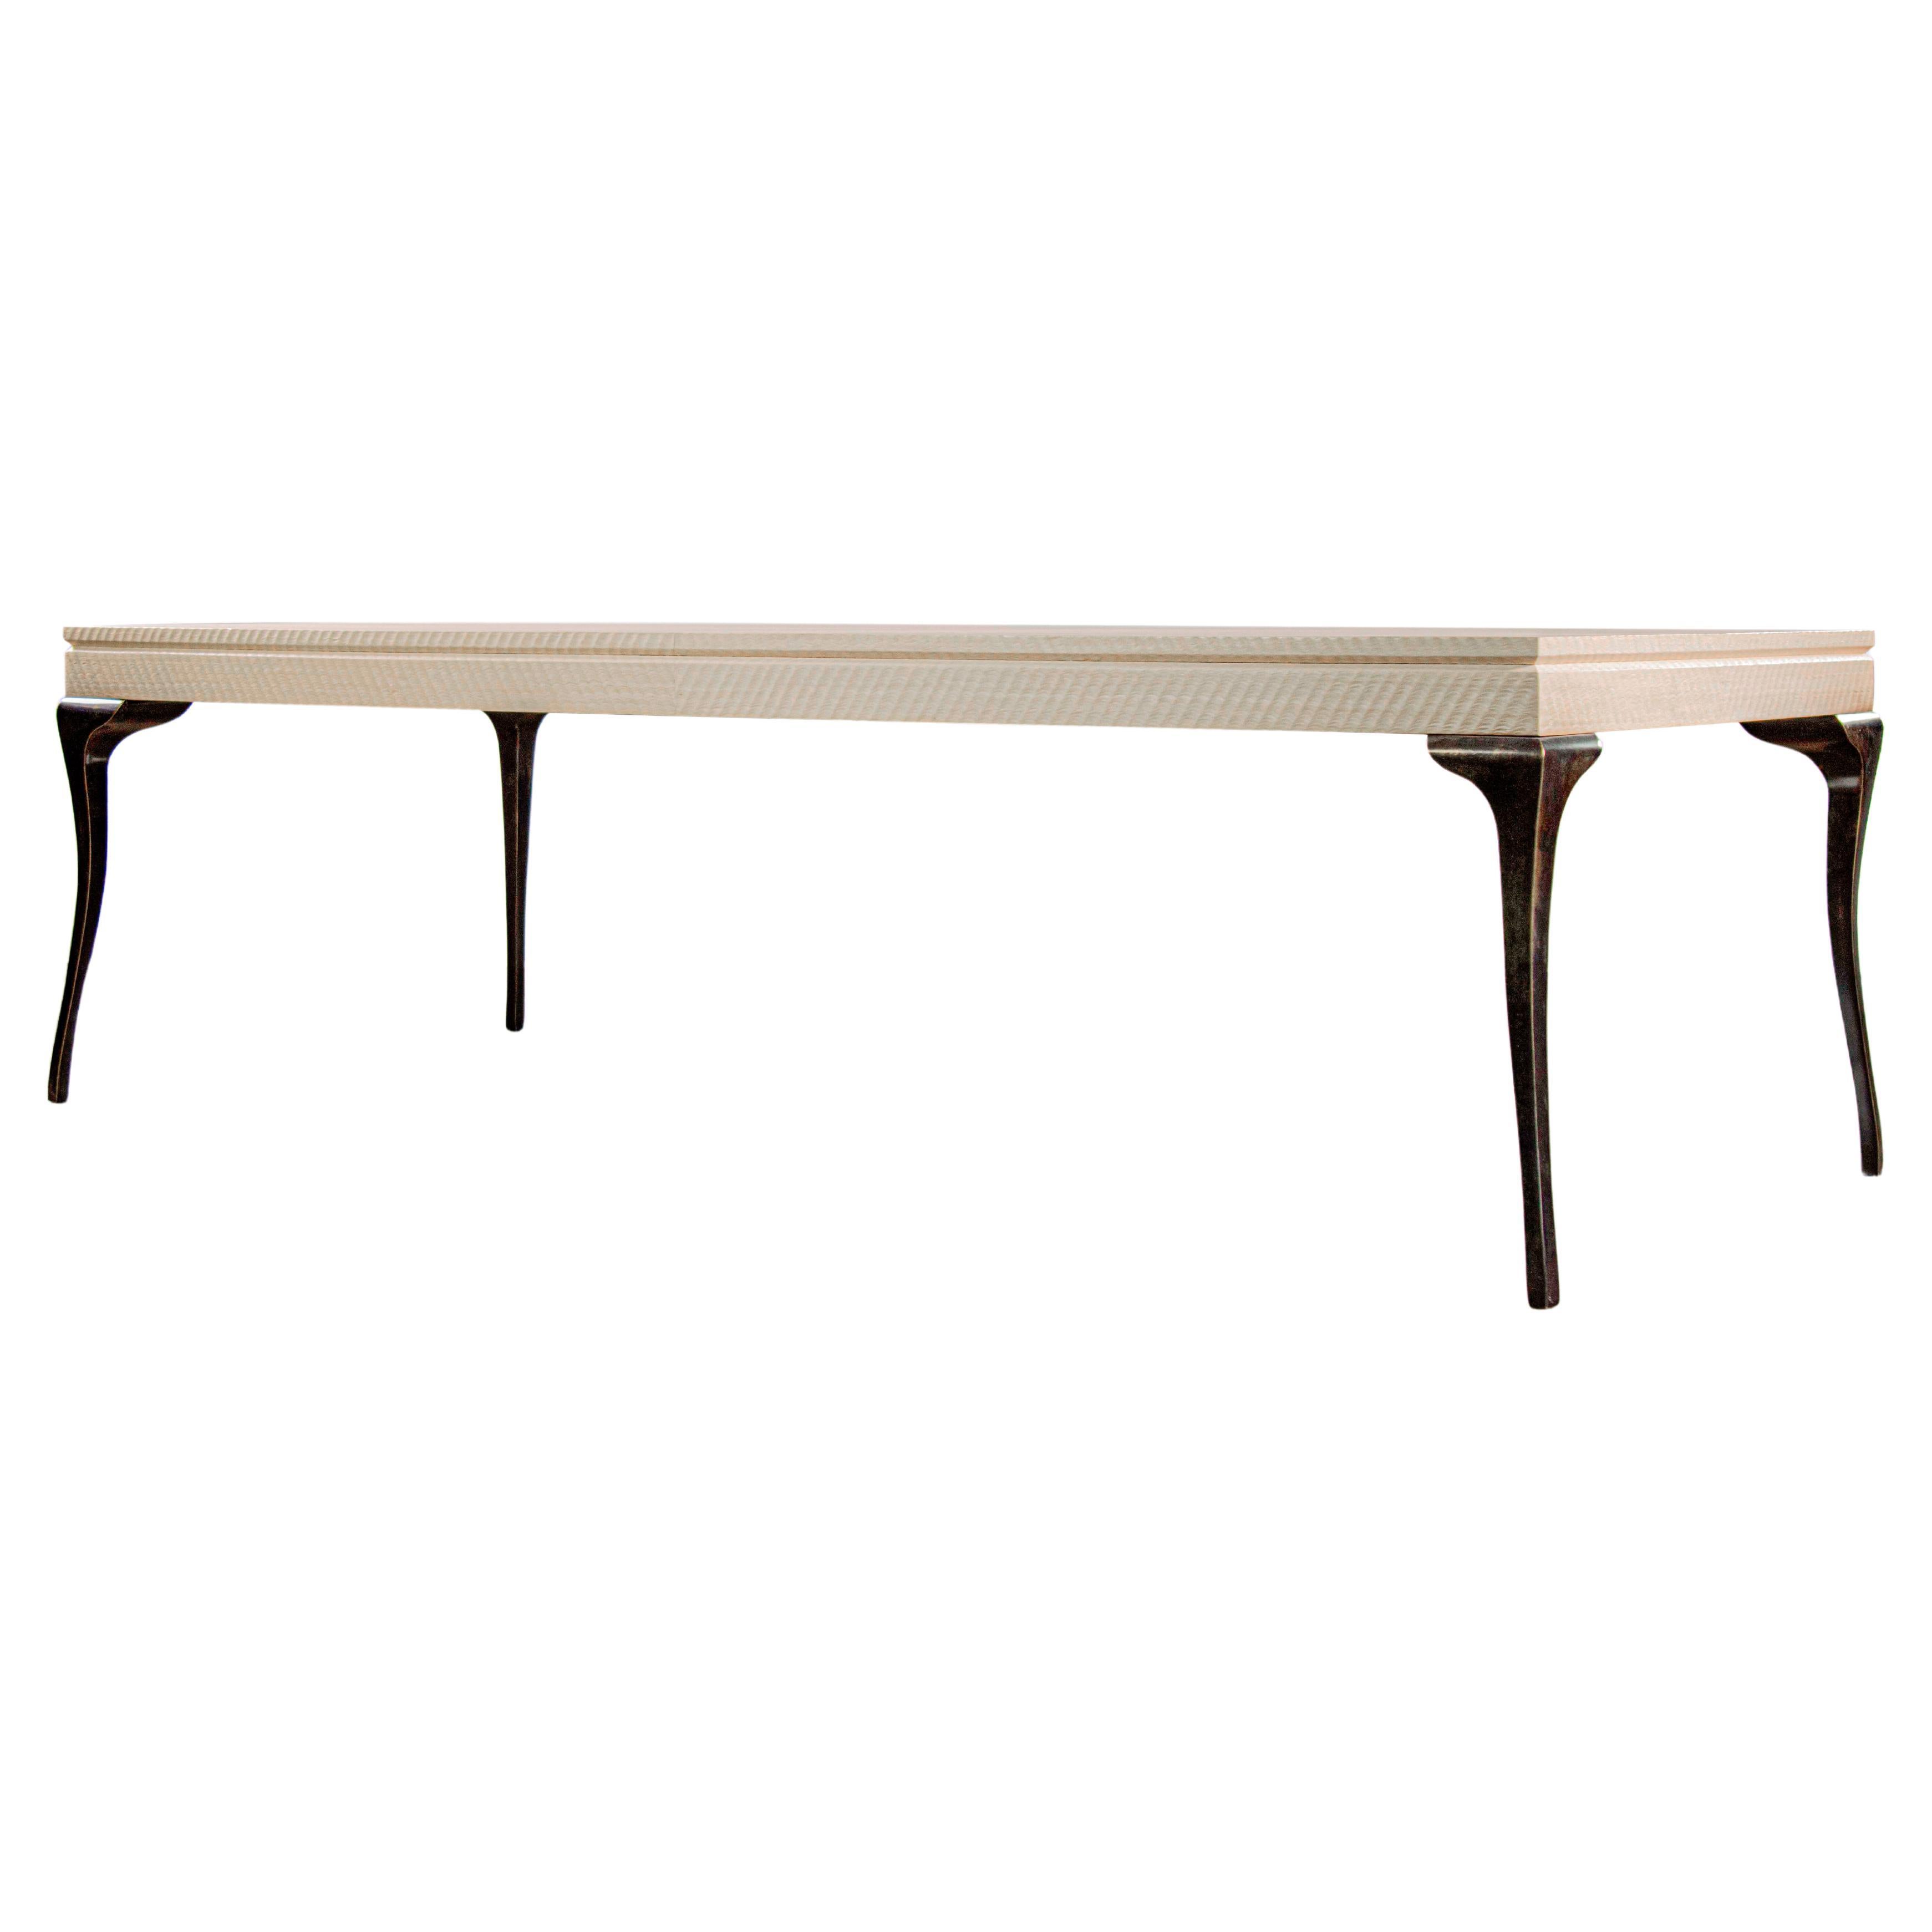 Cast Bronze and Figured Sycamore Coffee Table from Costantini, Enzio, in Stock